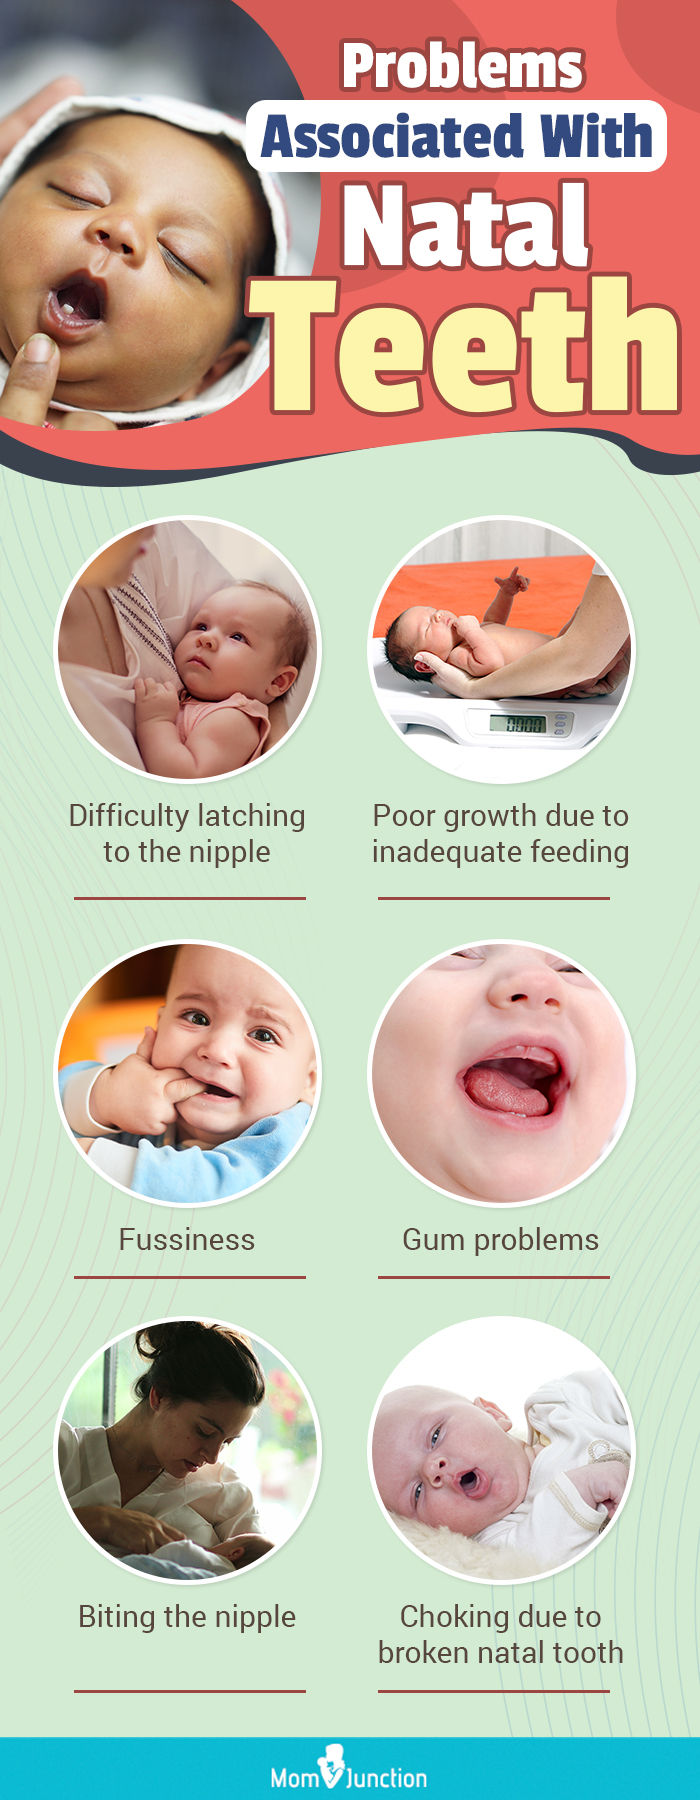 problems associated with natal teeth (infographic) 